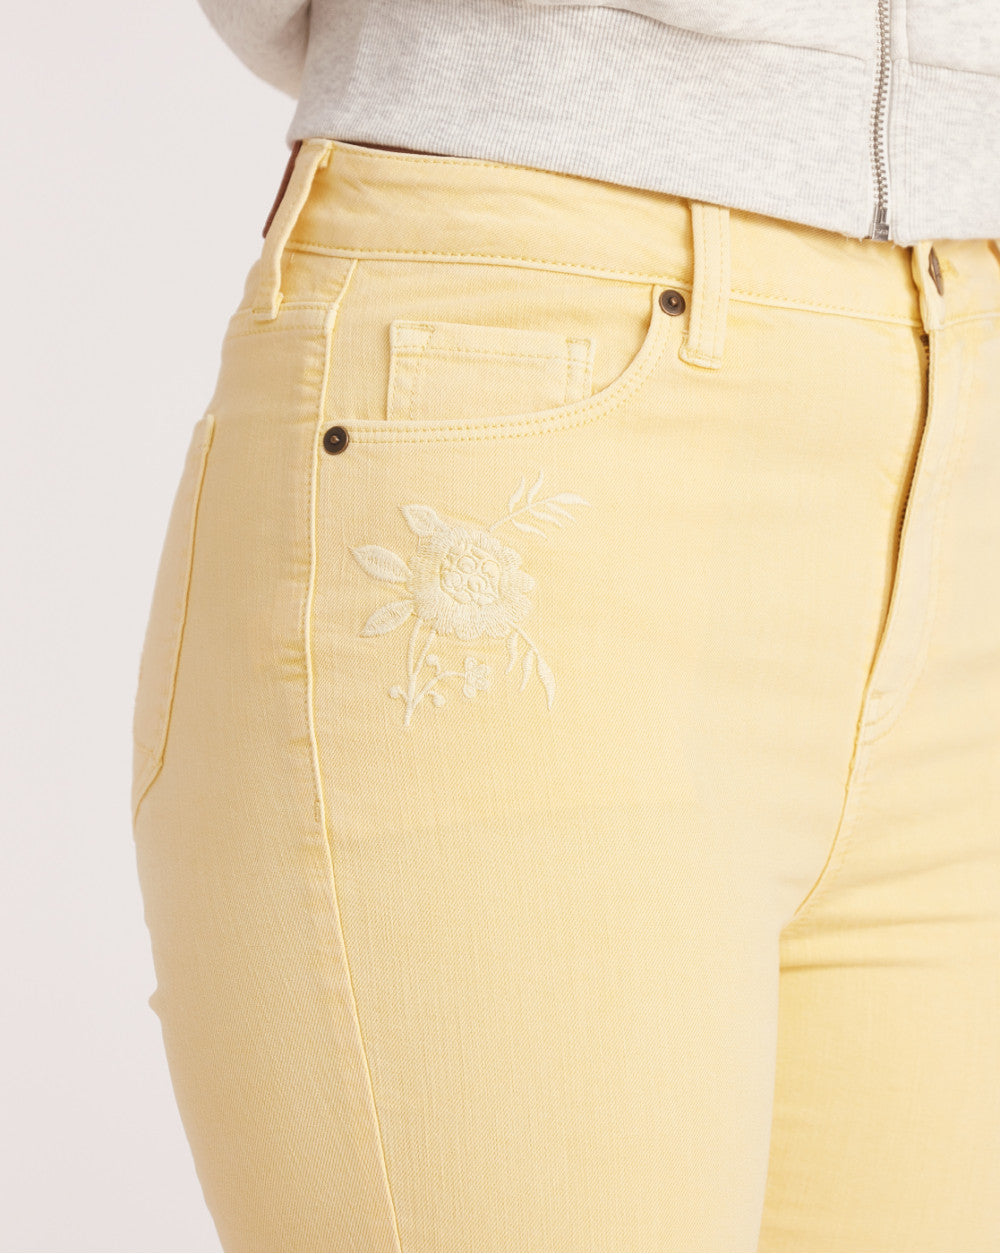 Slim-Fit Spandex Pants with Embroidered Back Pocket